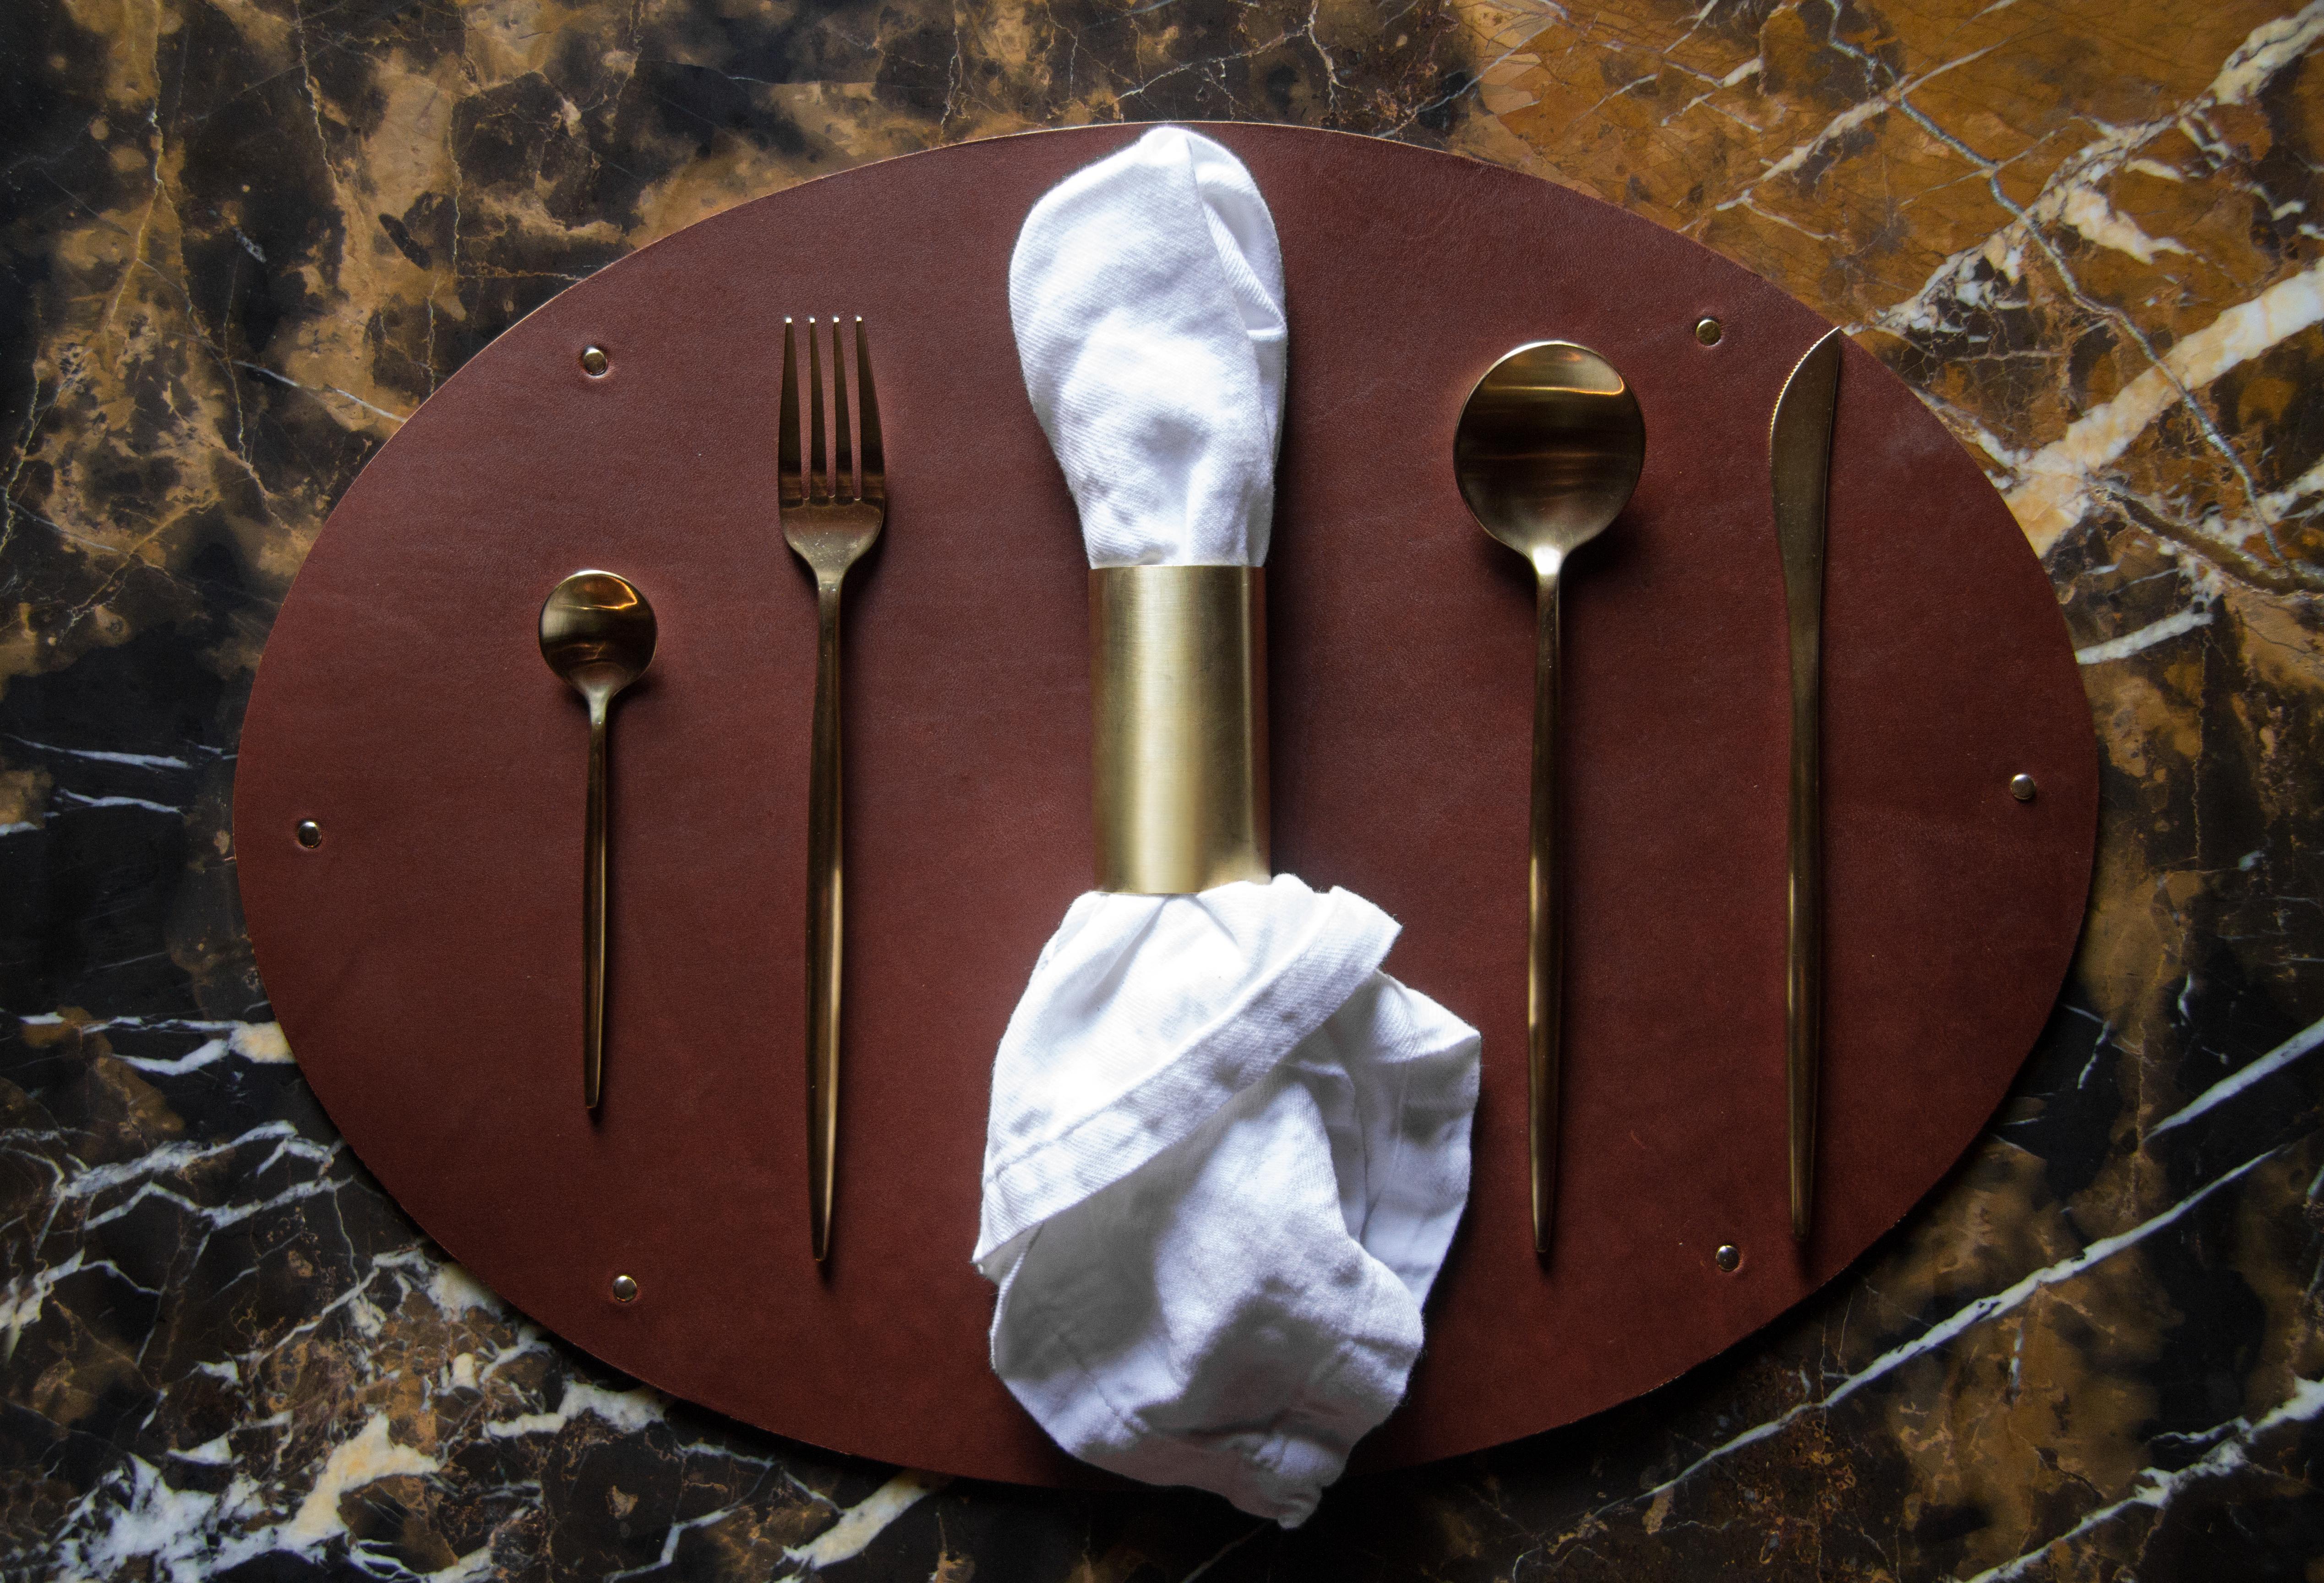 The (wh)ORE HAüS STUDIOS small goods collection was made for those that wanted to experience the (wh)ORE HAüS brand without committing to our larger pieces. Our leather and brass placemat set is made of leather with brass accents. It pairs great